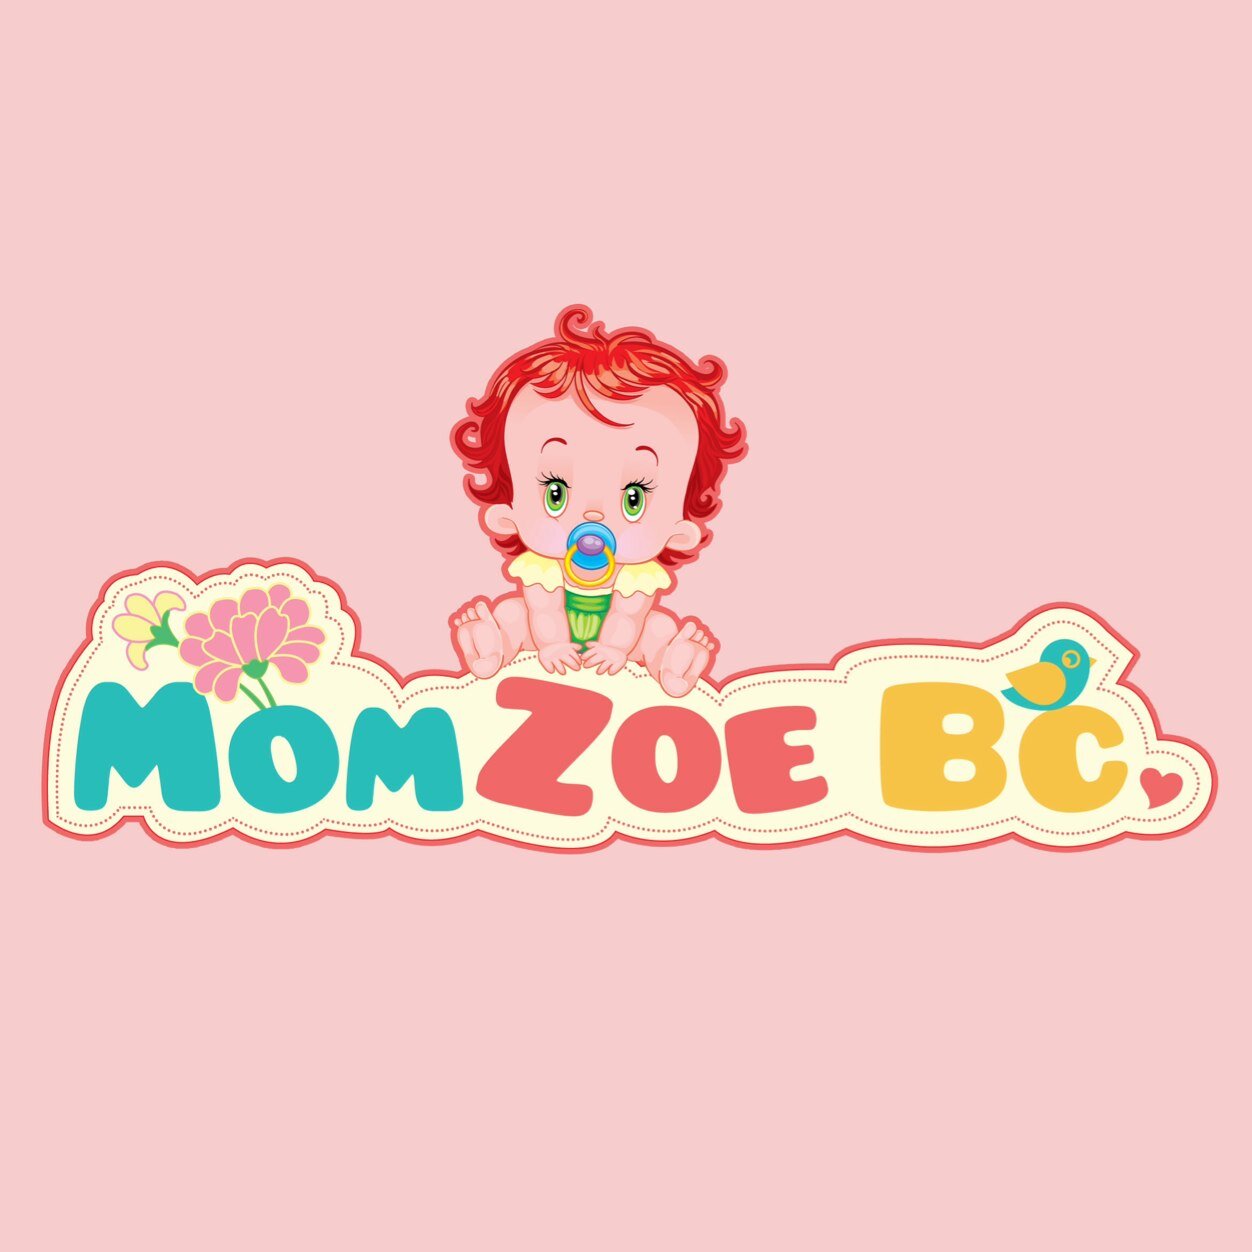 ❤We Are the Fashion Lifestyle For Baby & Kids❤
BBM : 2A4955EC 
SMSonly : 089677492616 
Instagram : @momzoebc
FBpage : http://t.co/dwNfMVjM